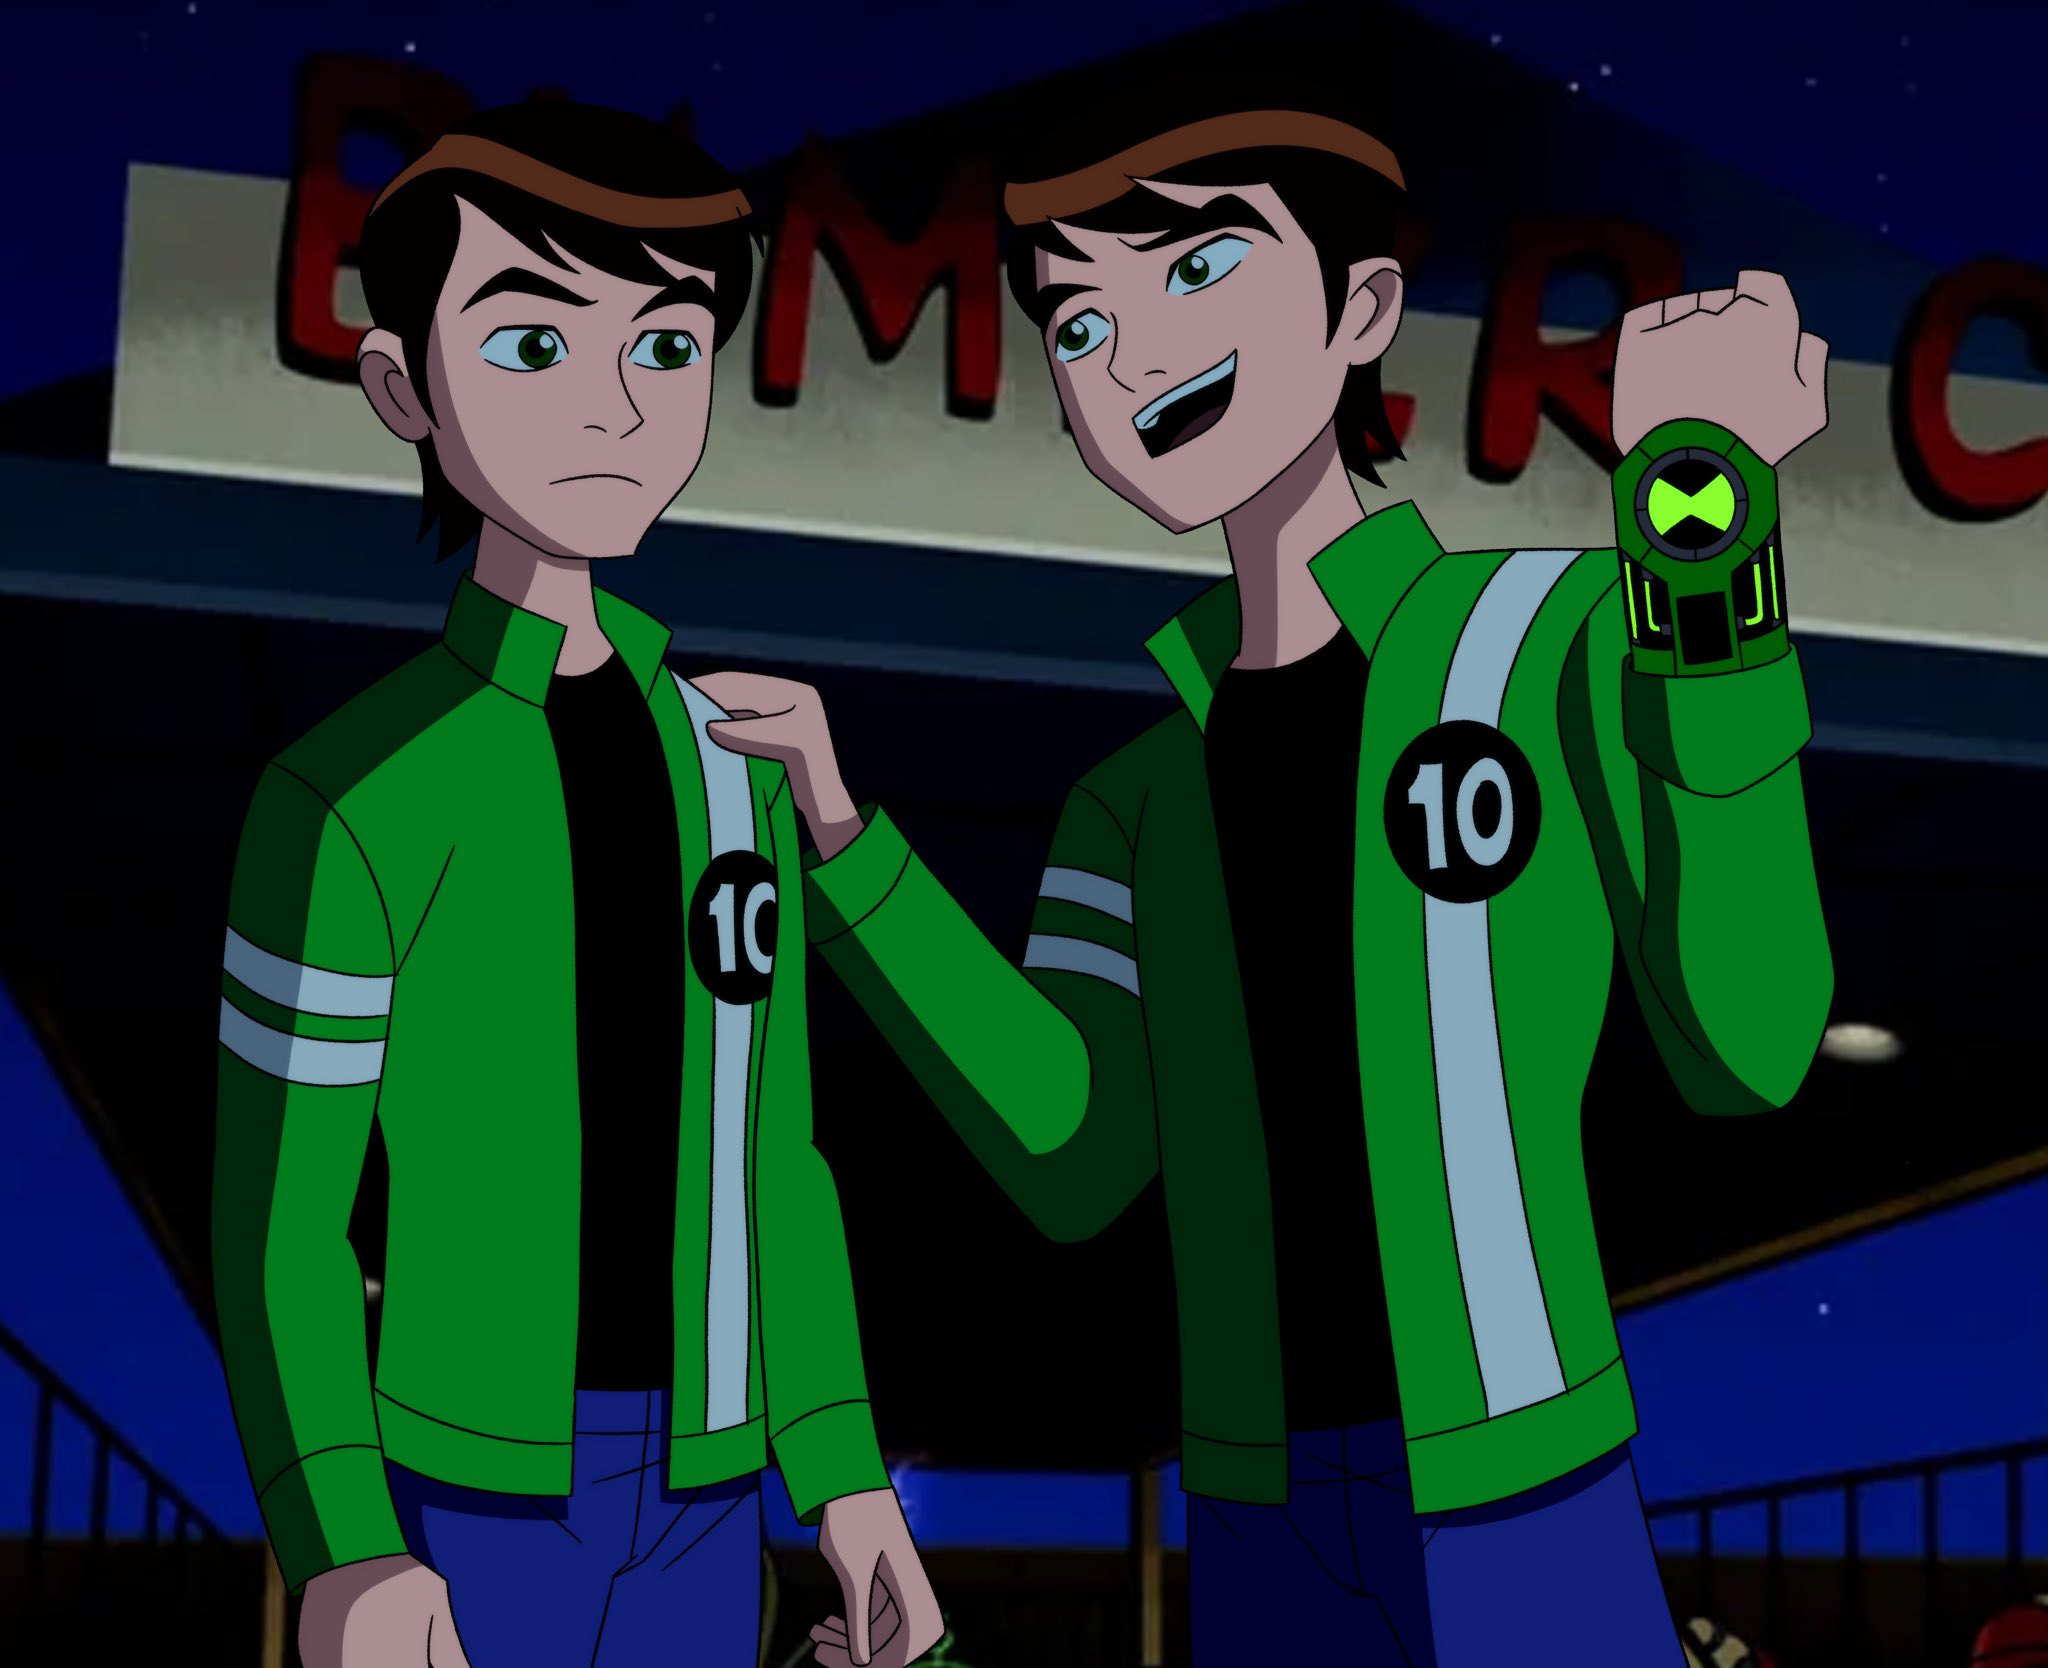 As much as UAF is my favorite Ben 10, I missed how “restrained